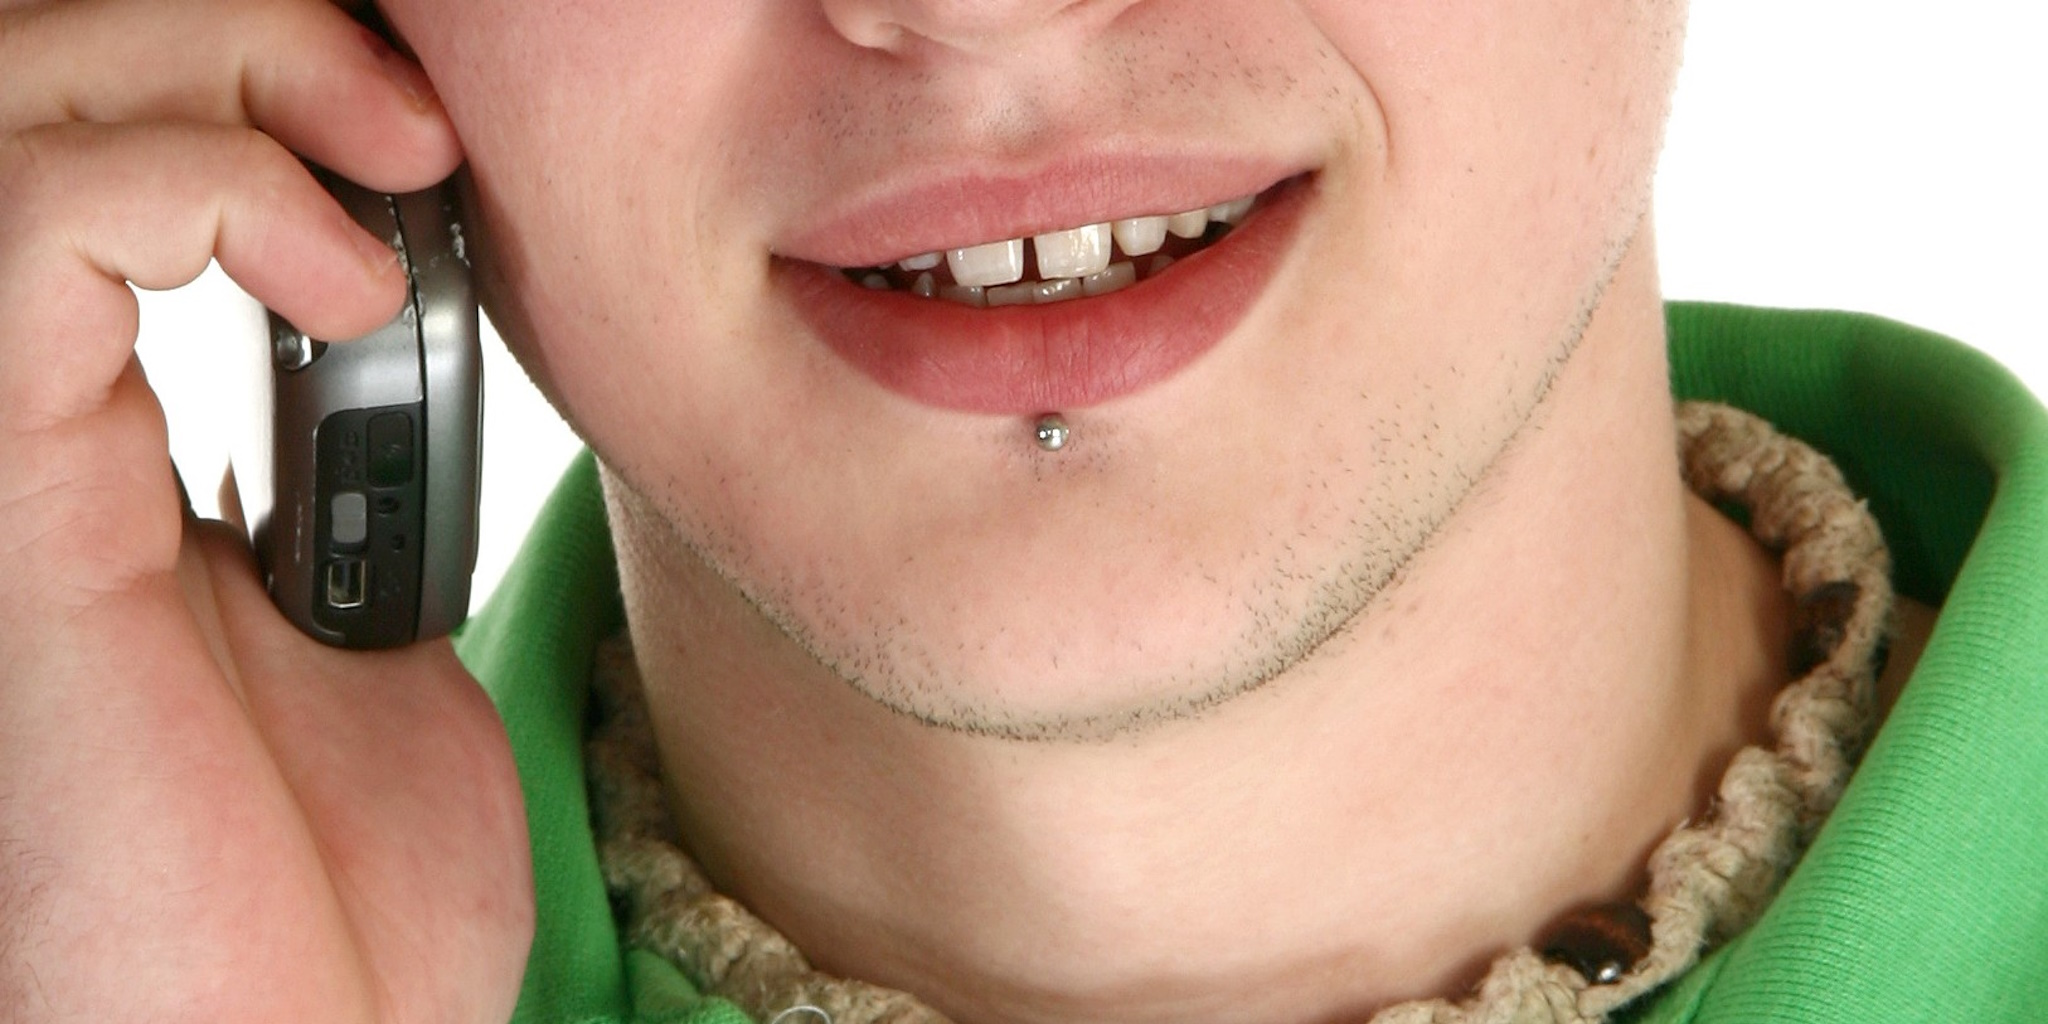 A man with a labret piercing under his lip.